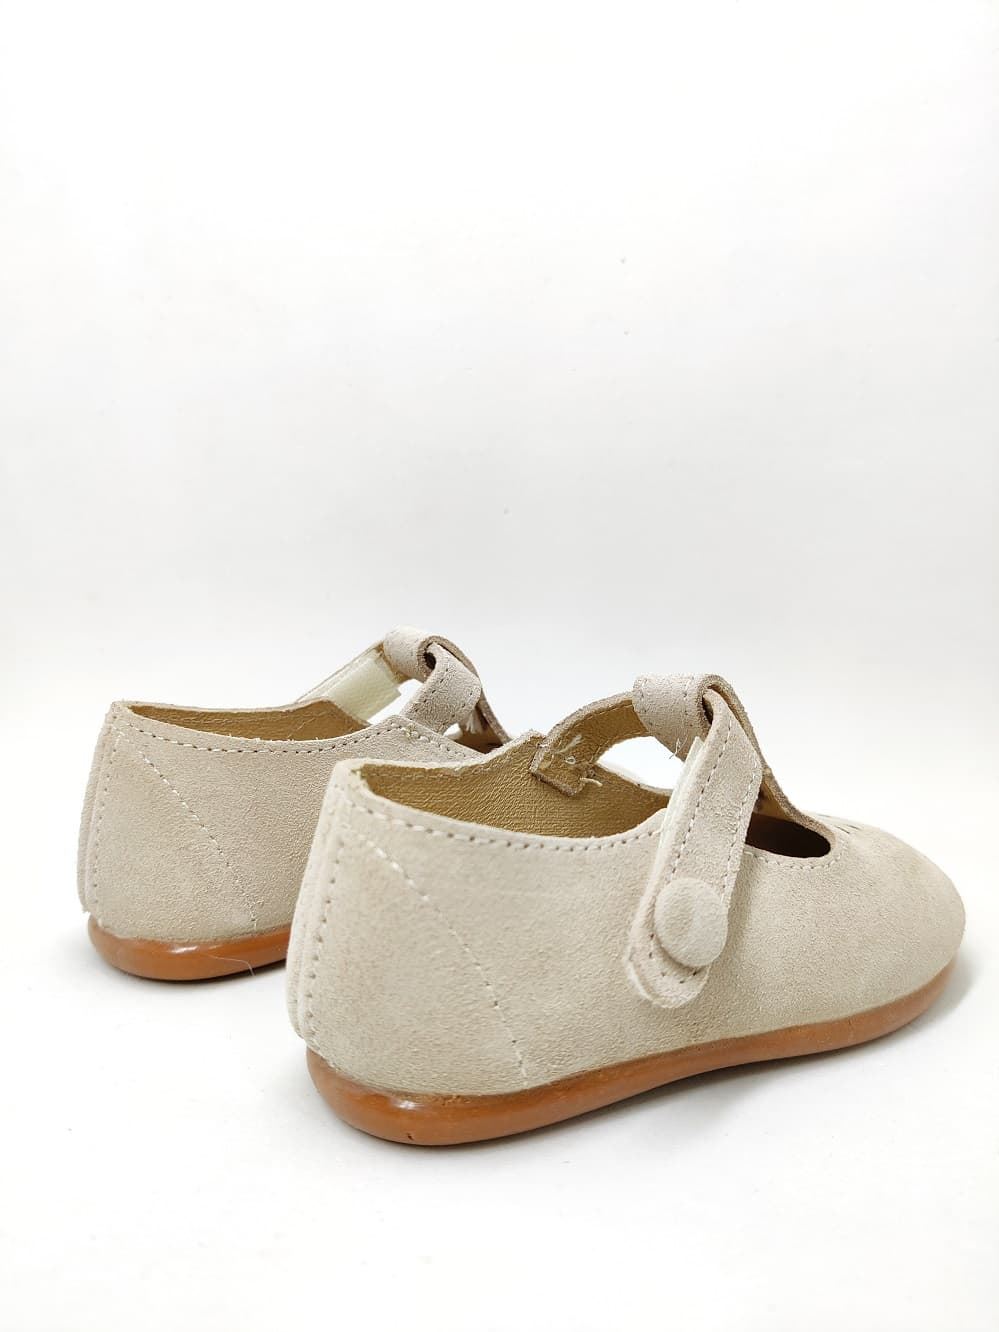 Unisex children's Pepito sweets in raw suede - Image 4